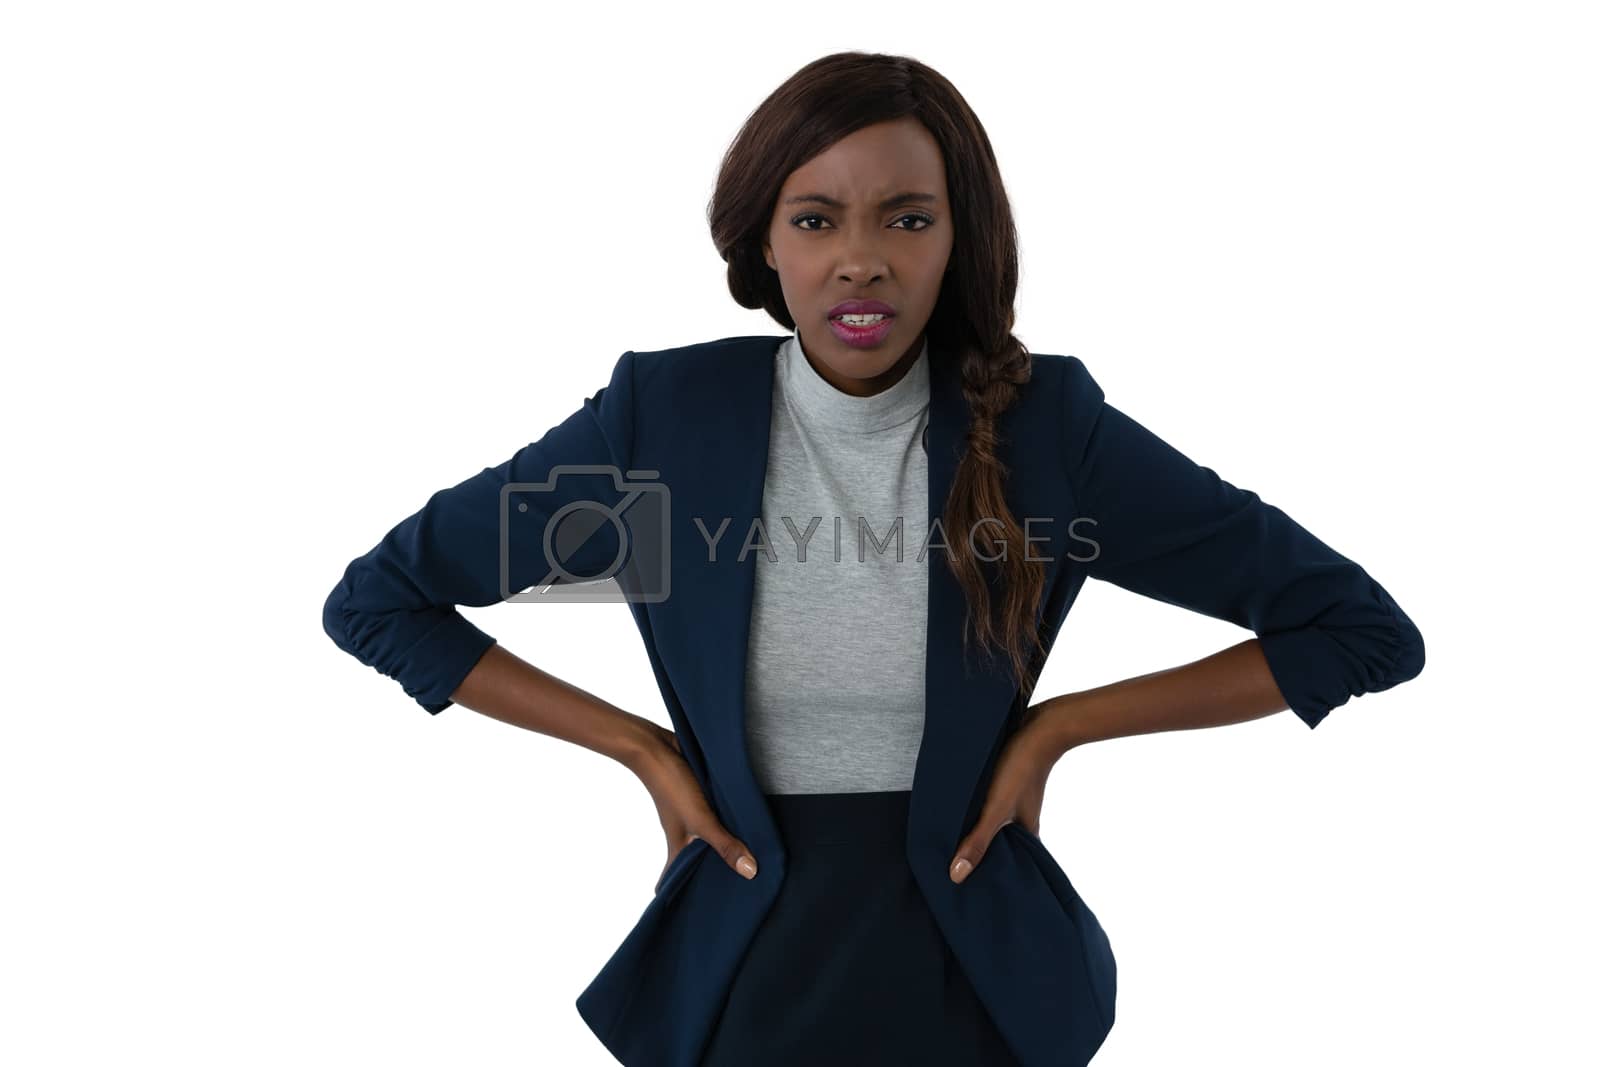 Royalty free image of Portrait of irritated businesswoman with hands on hip by Wavebreakmedia